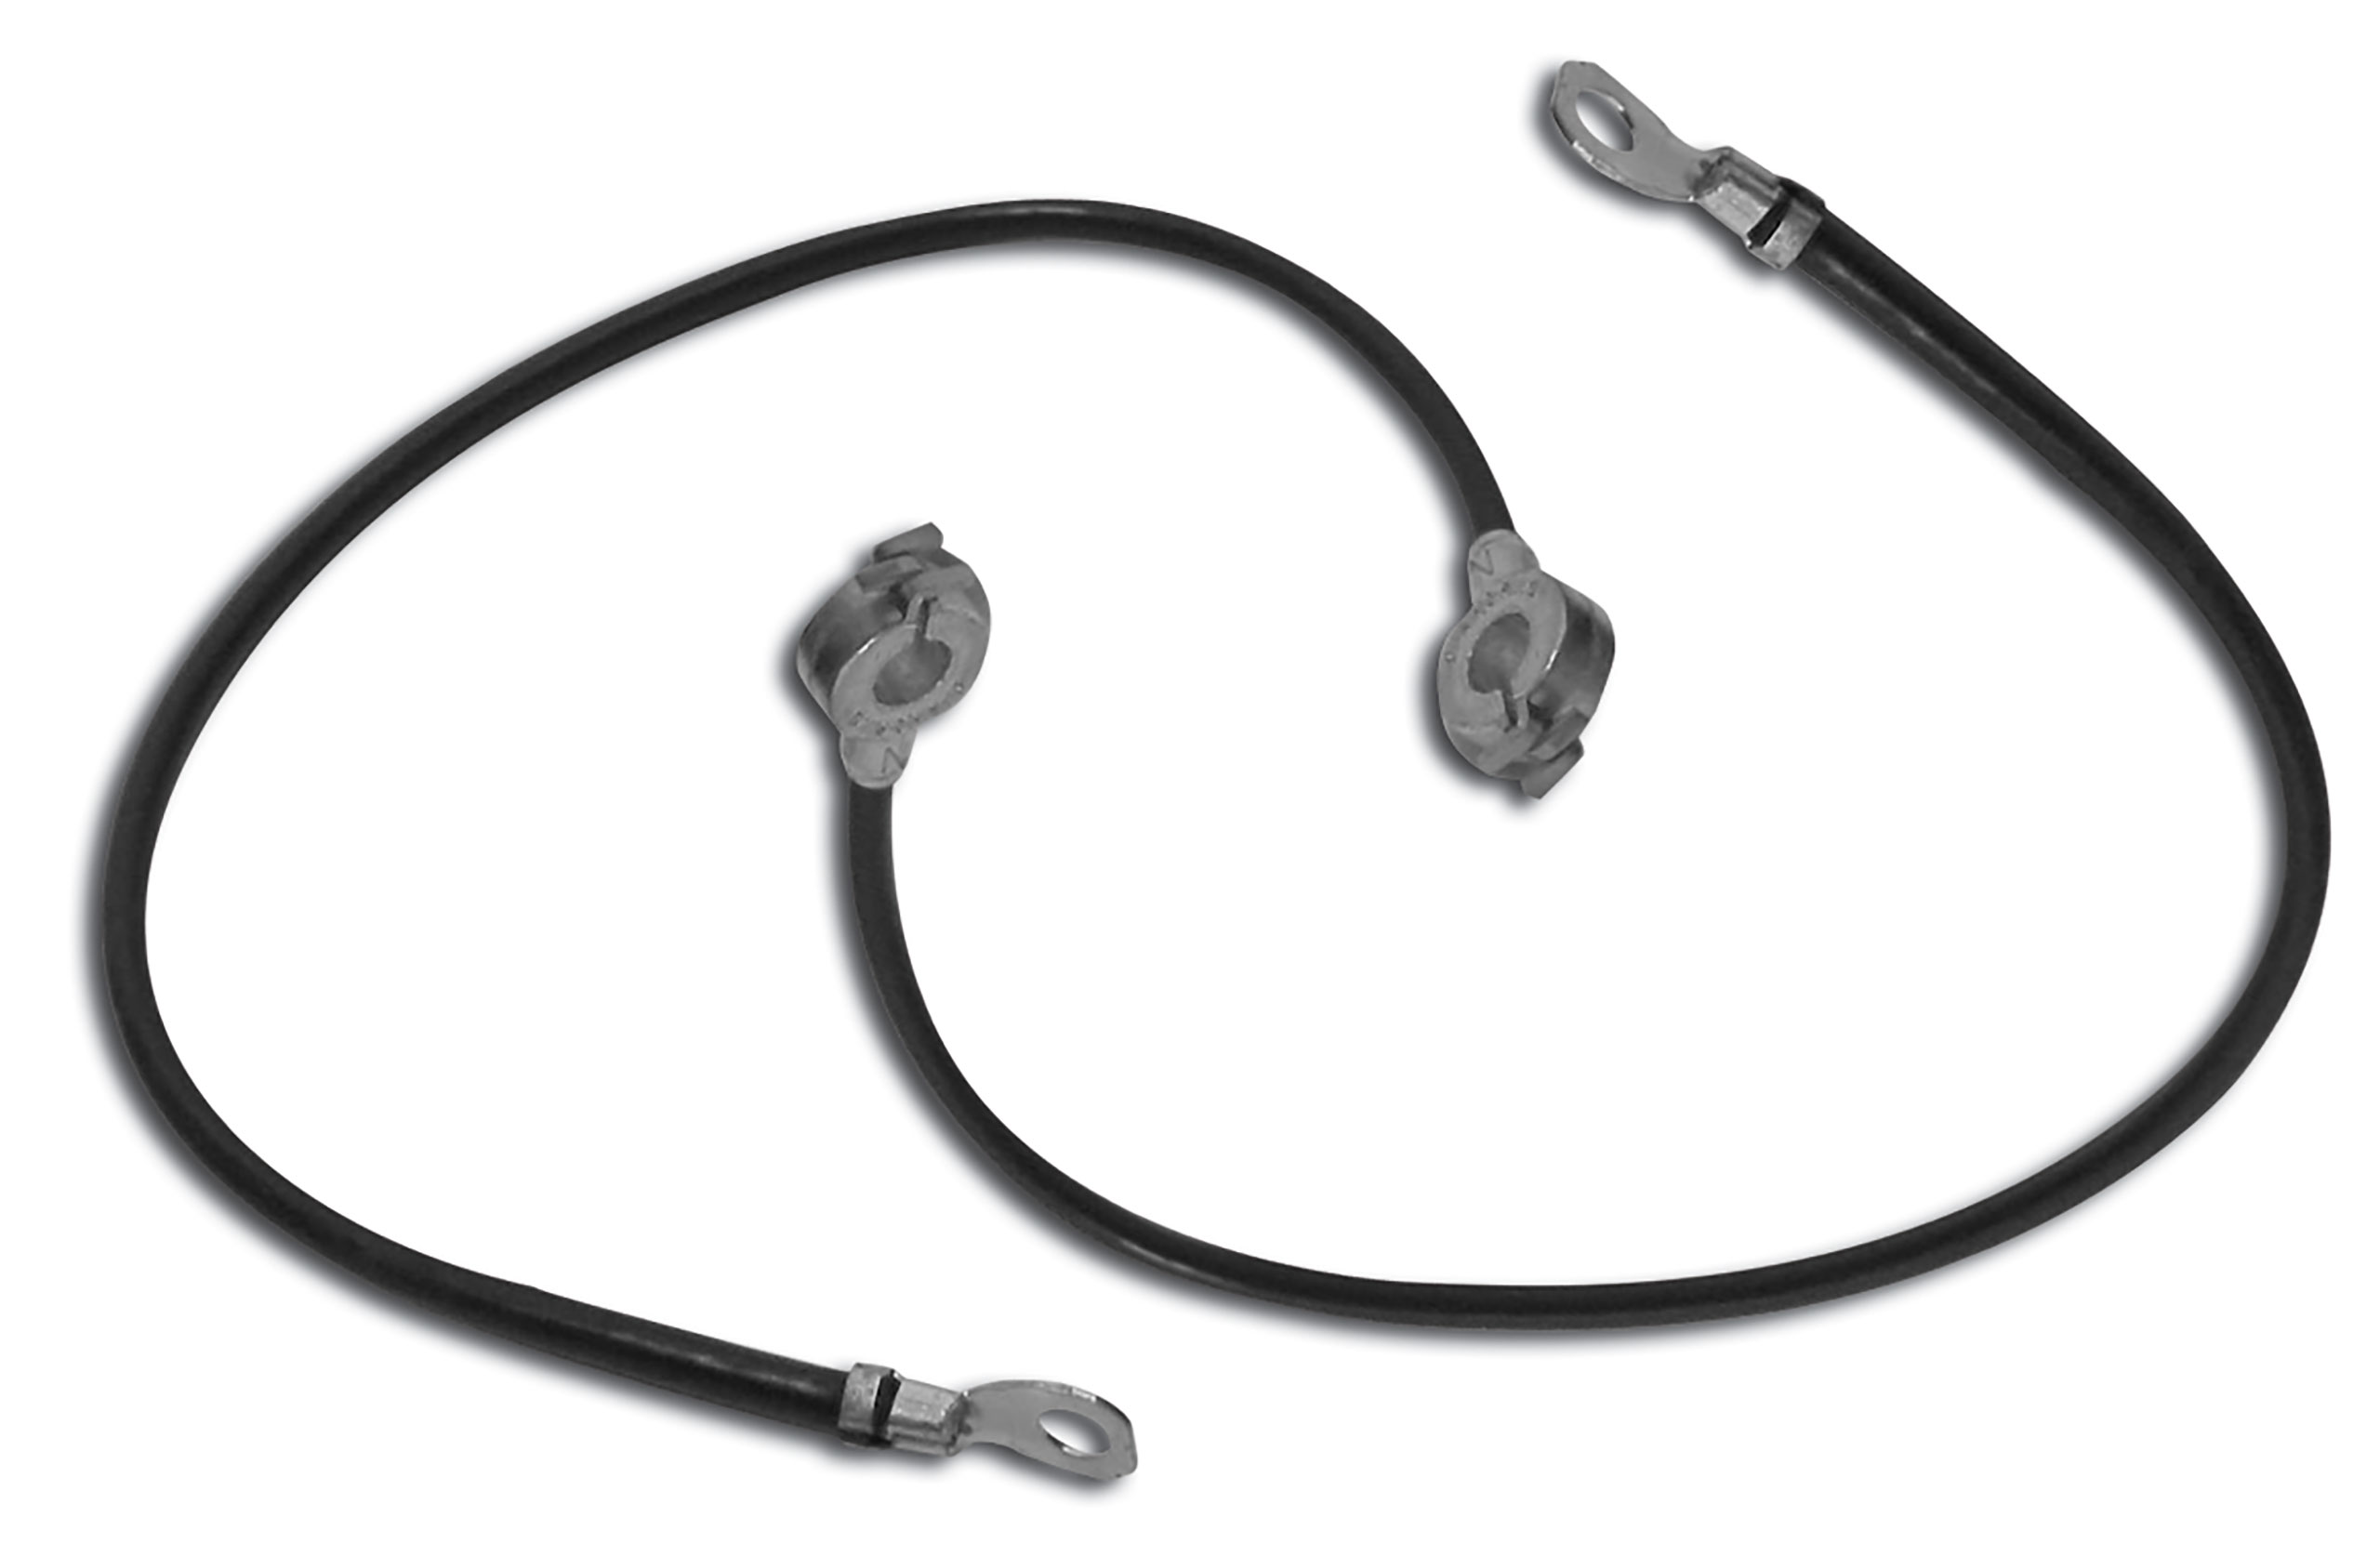 C2 1963-1965 Chevrolet Corvette Battery Cables. 327 W/O Air Conditioning - Lectric Limited, Inc.